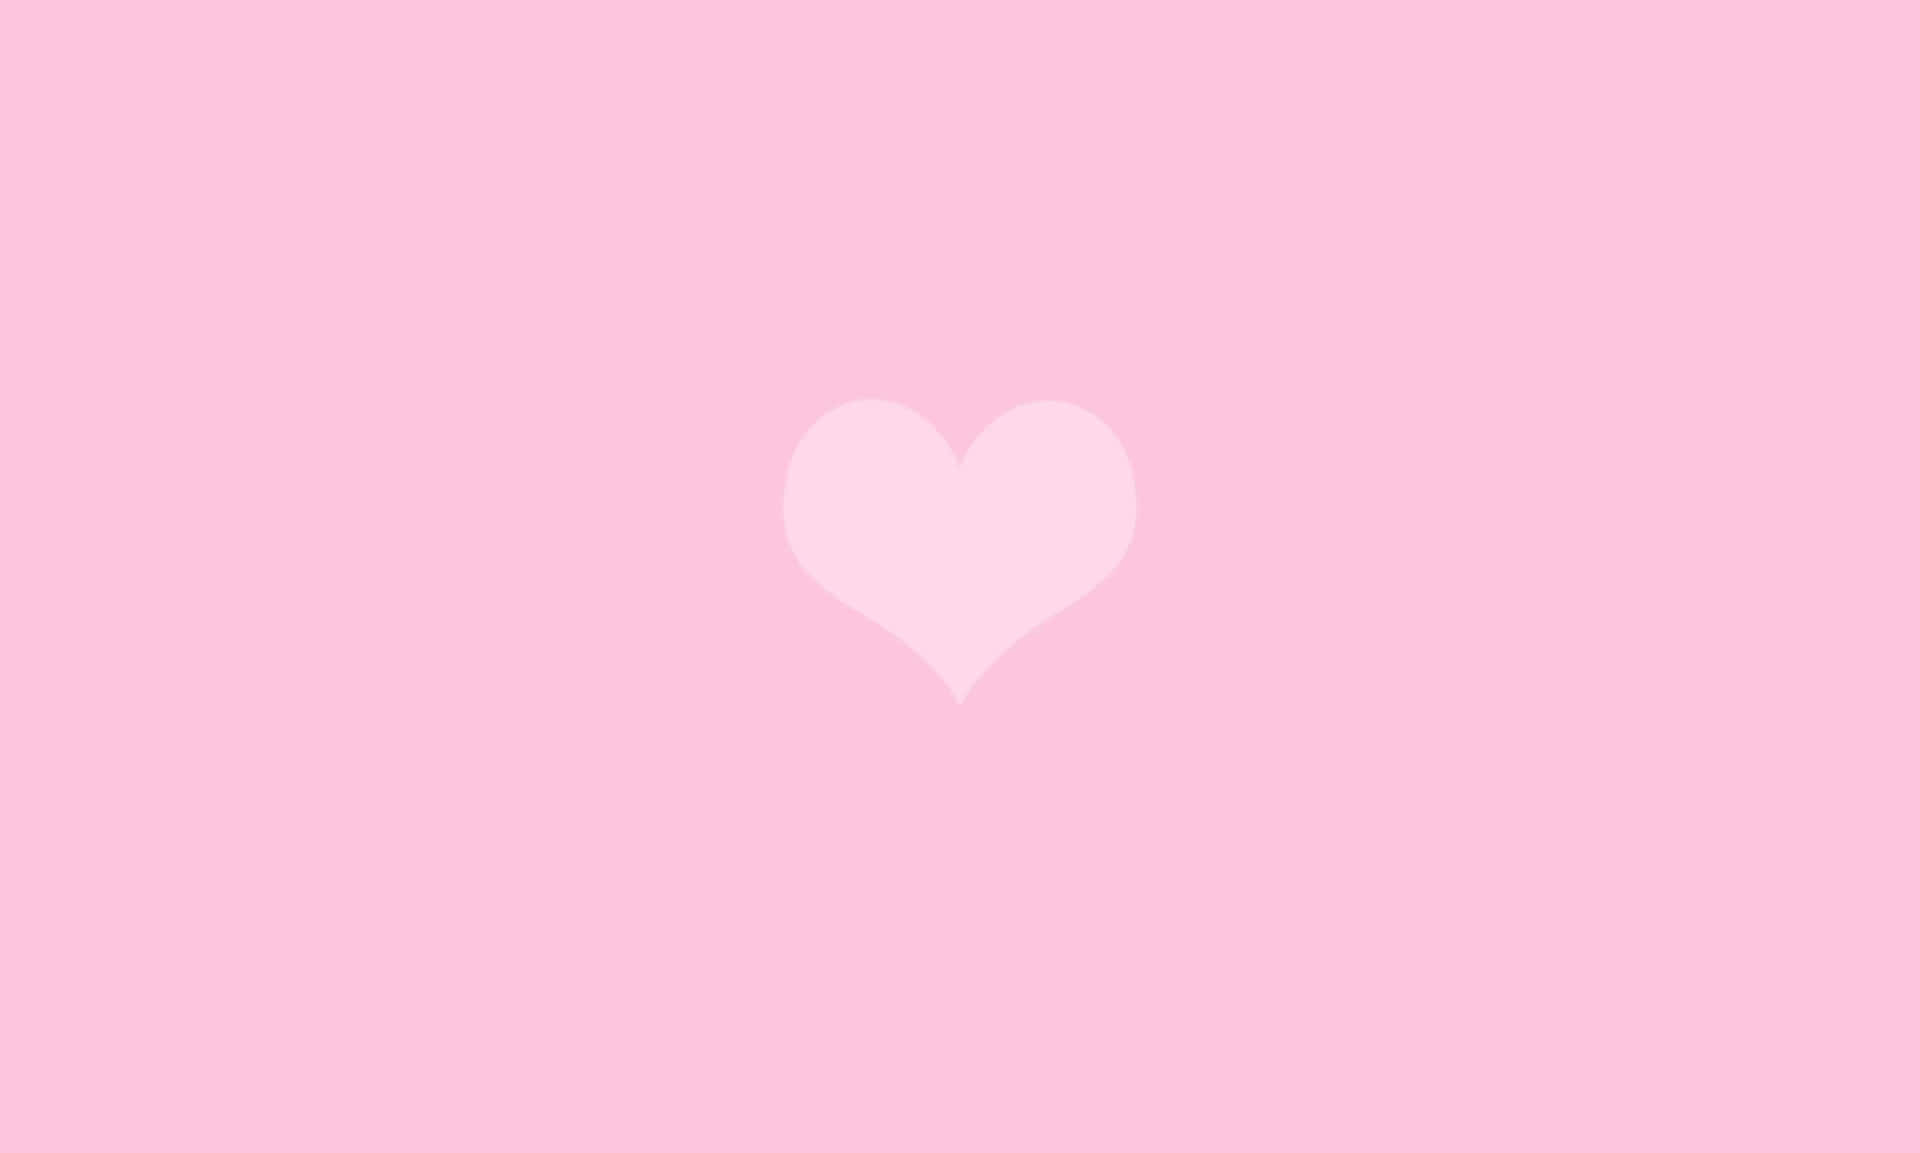 Spread the love with sparkly pink hearts Wallpaper